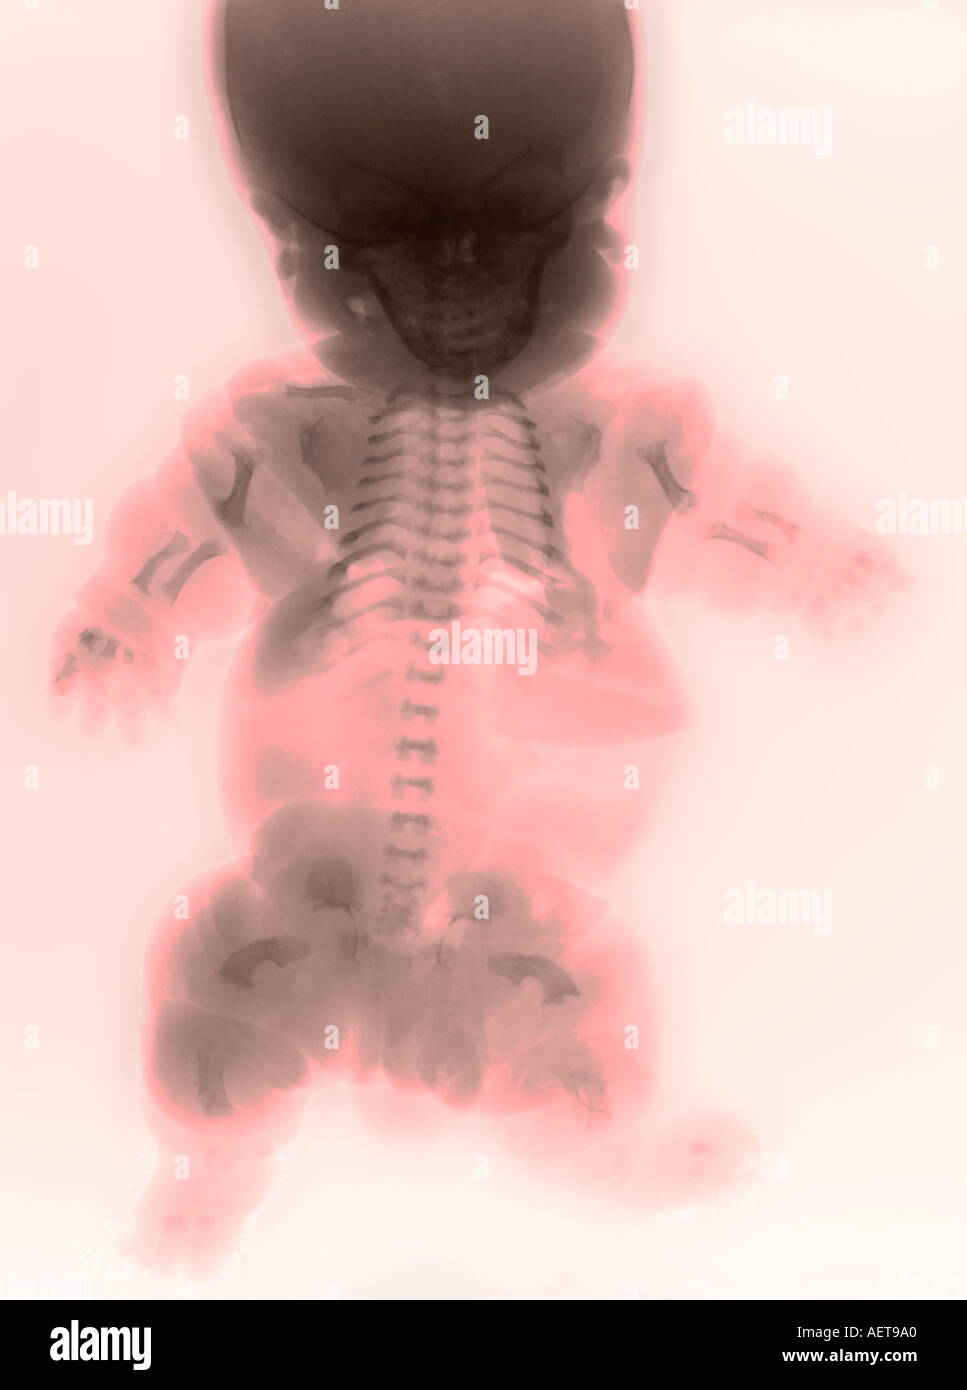 xray of a baby showing dwarfism Stock Photo